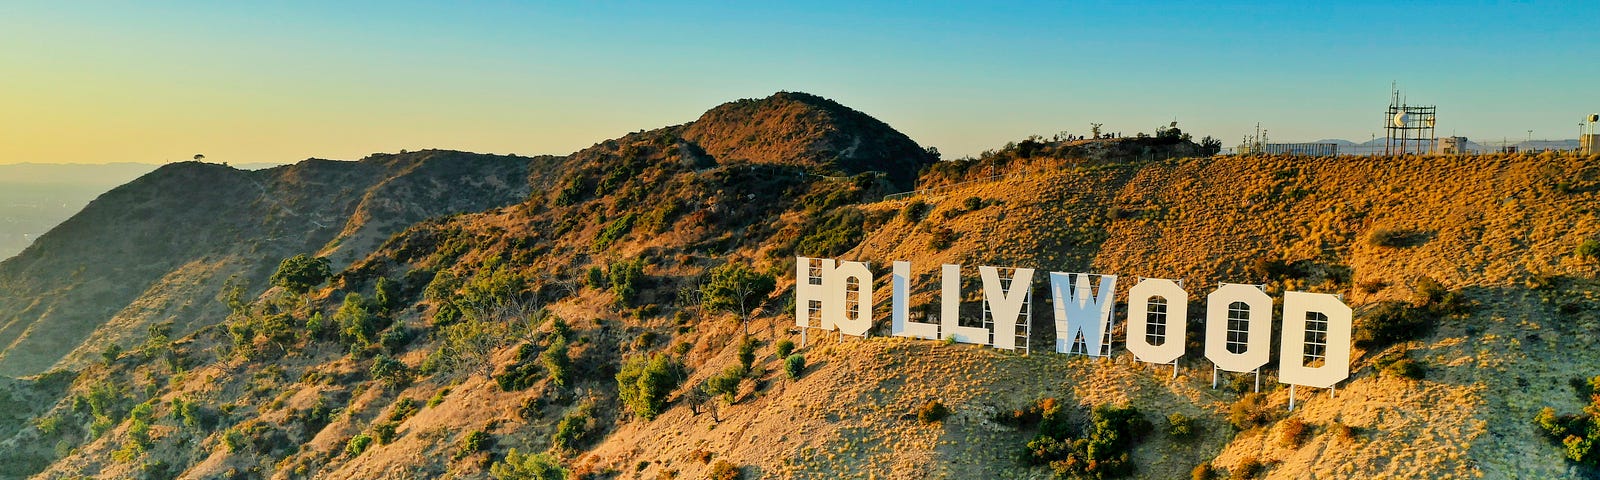 The famous HOLLYWOOD sign on the side of a hill.